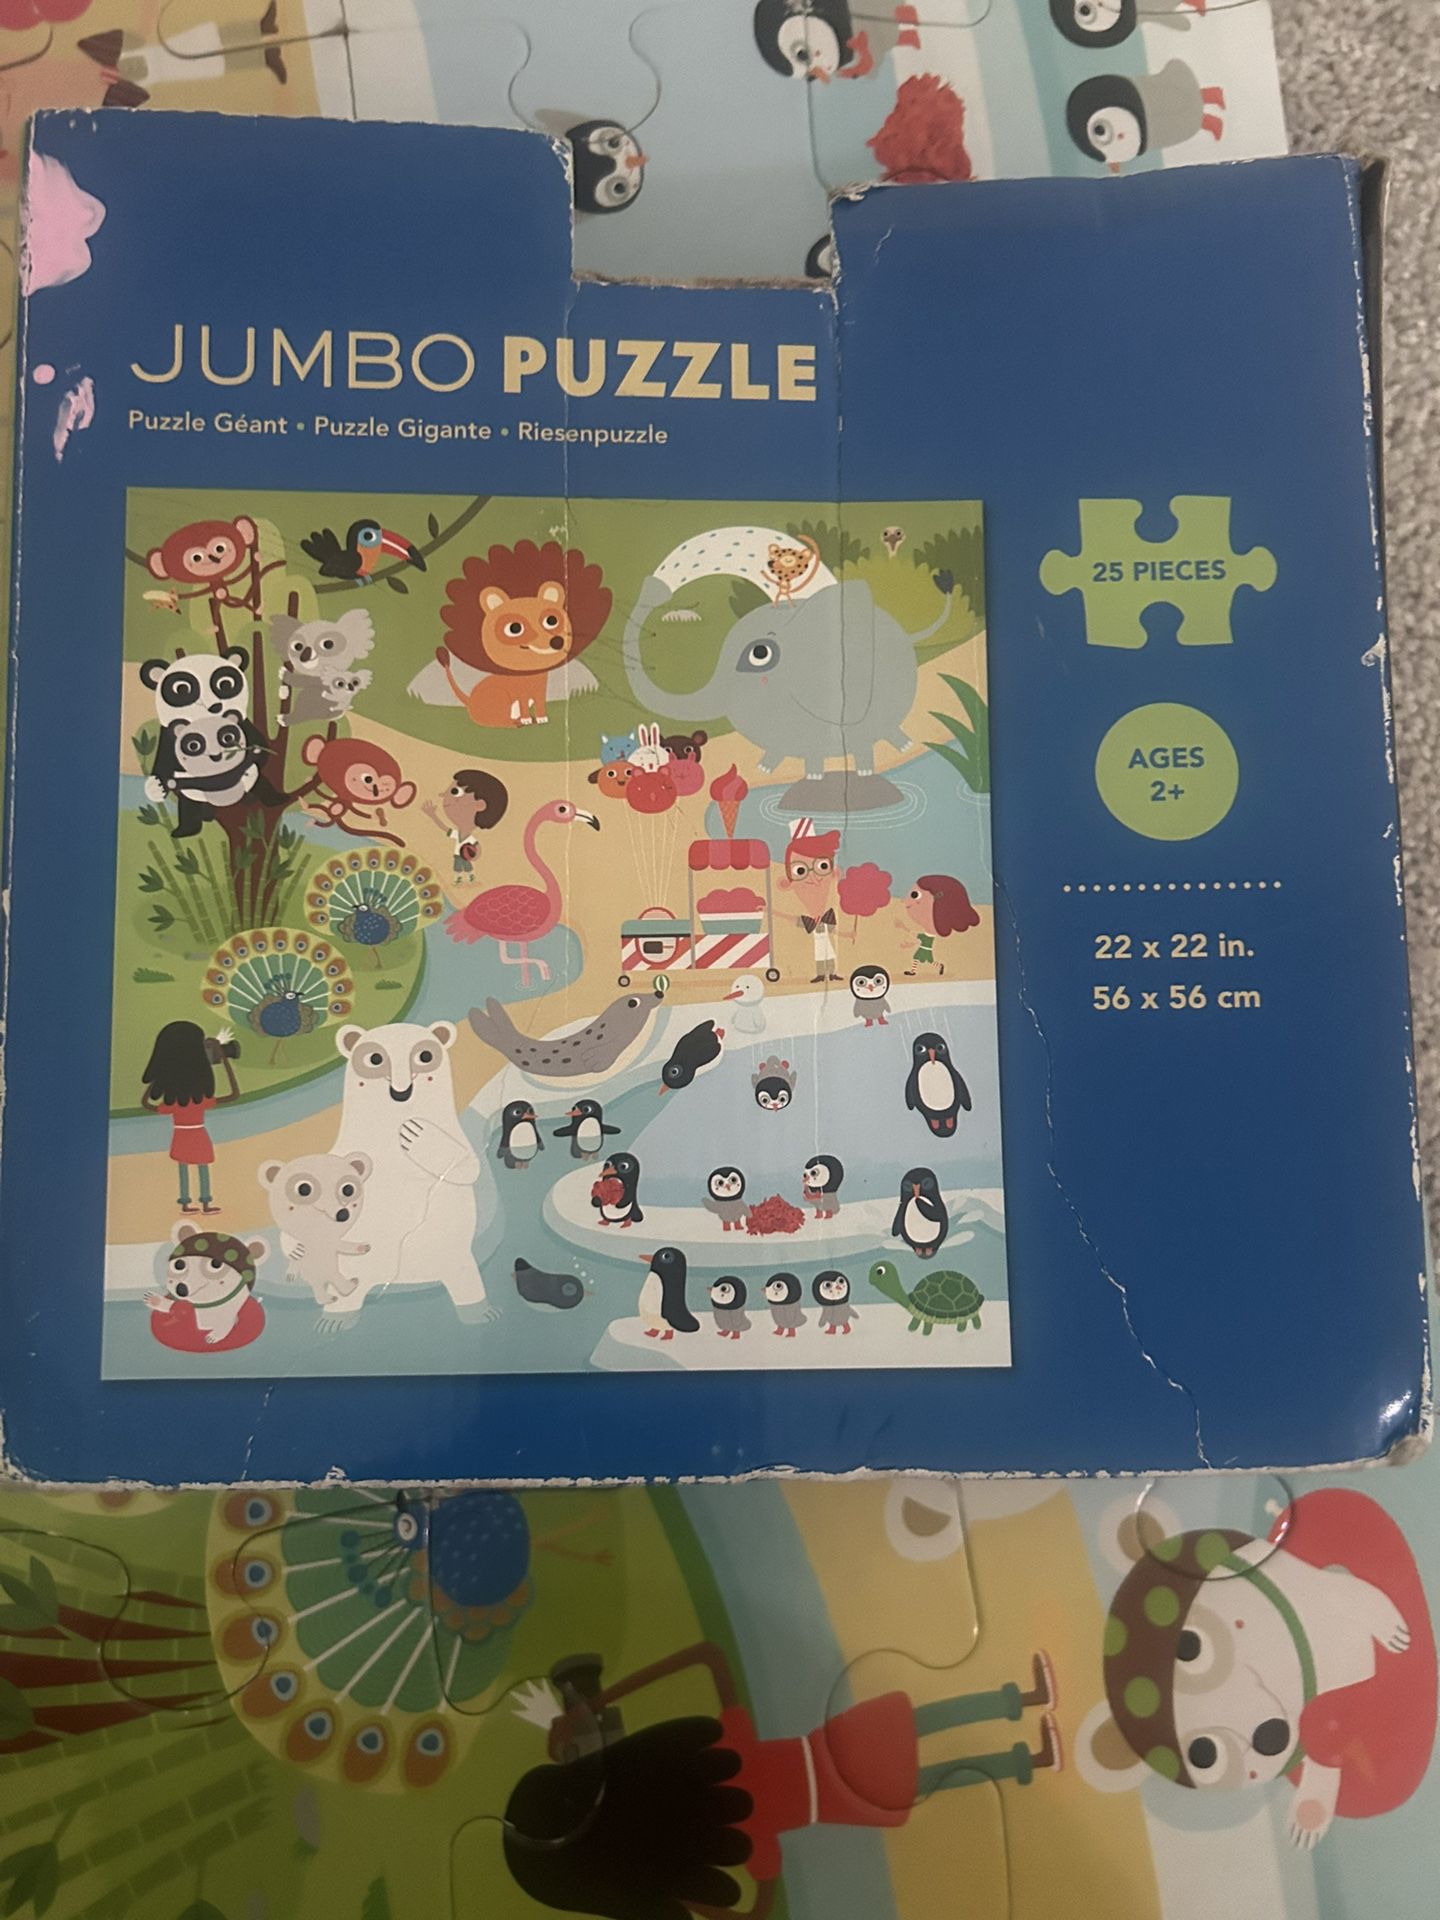 Puzzles (total 12) - 10 Wooden Puzzles +1 World Map And 1 Jumbo Puzzle